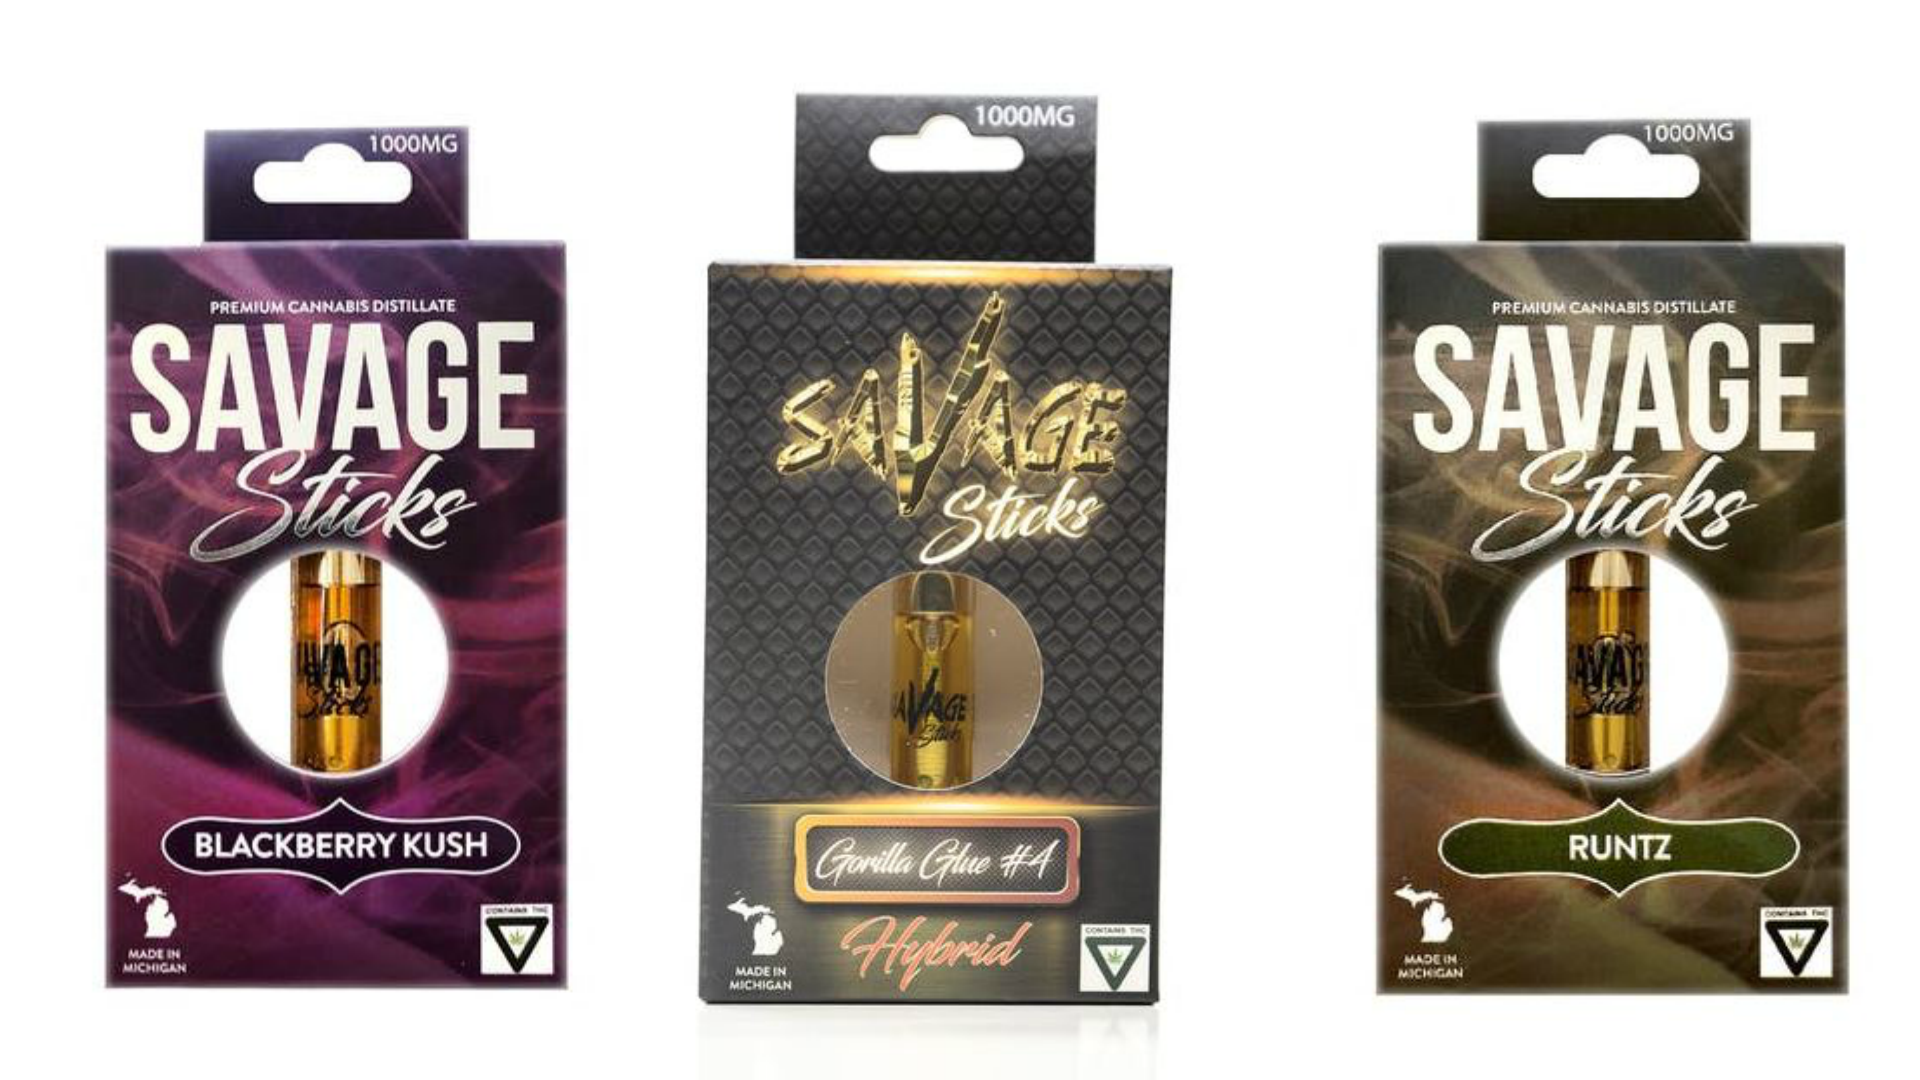 Four marijuana vaping products have been recalled due to high levels of vitamin E acetate.